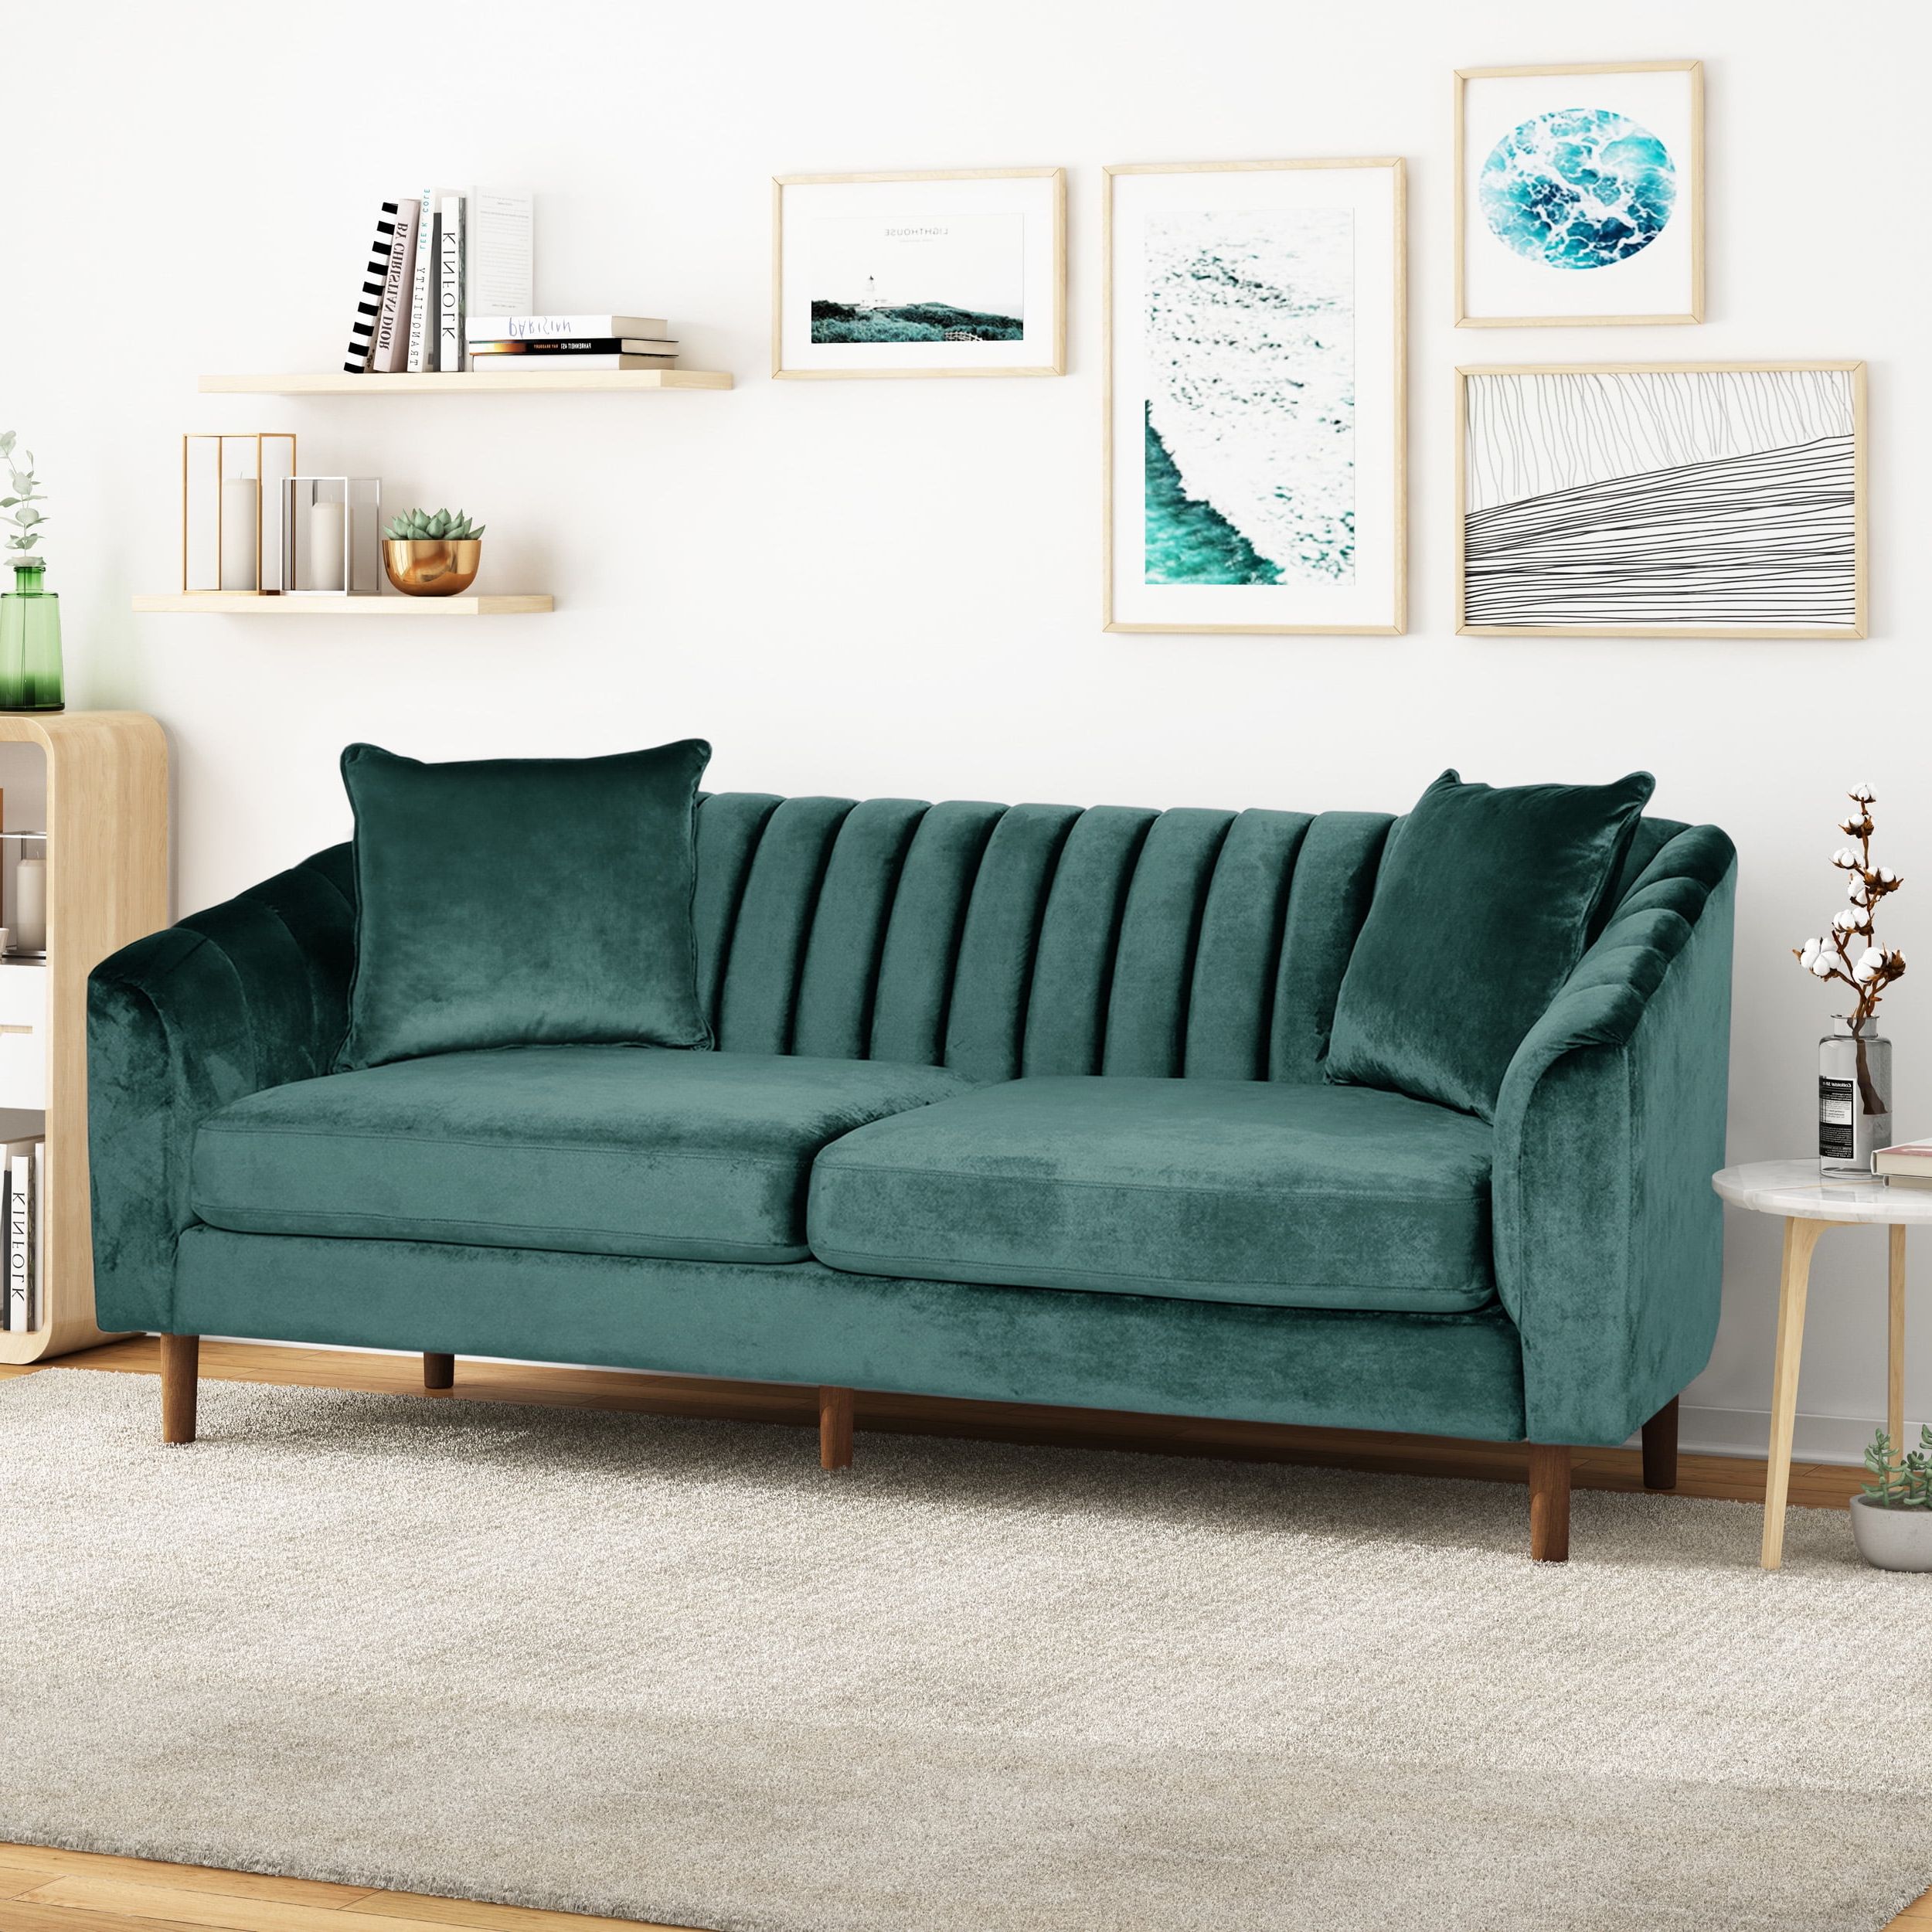 Noble House Orly Contemporary 3 Seater Velvet Sofa, Teal – Walmart Pertaining To Modern Velvet Sofa Recliners With Storage (Gallery 7 of 20)